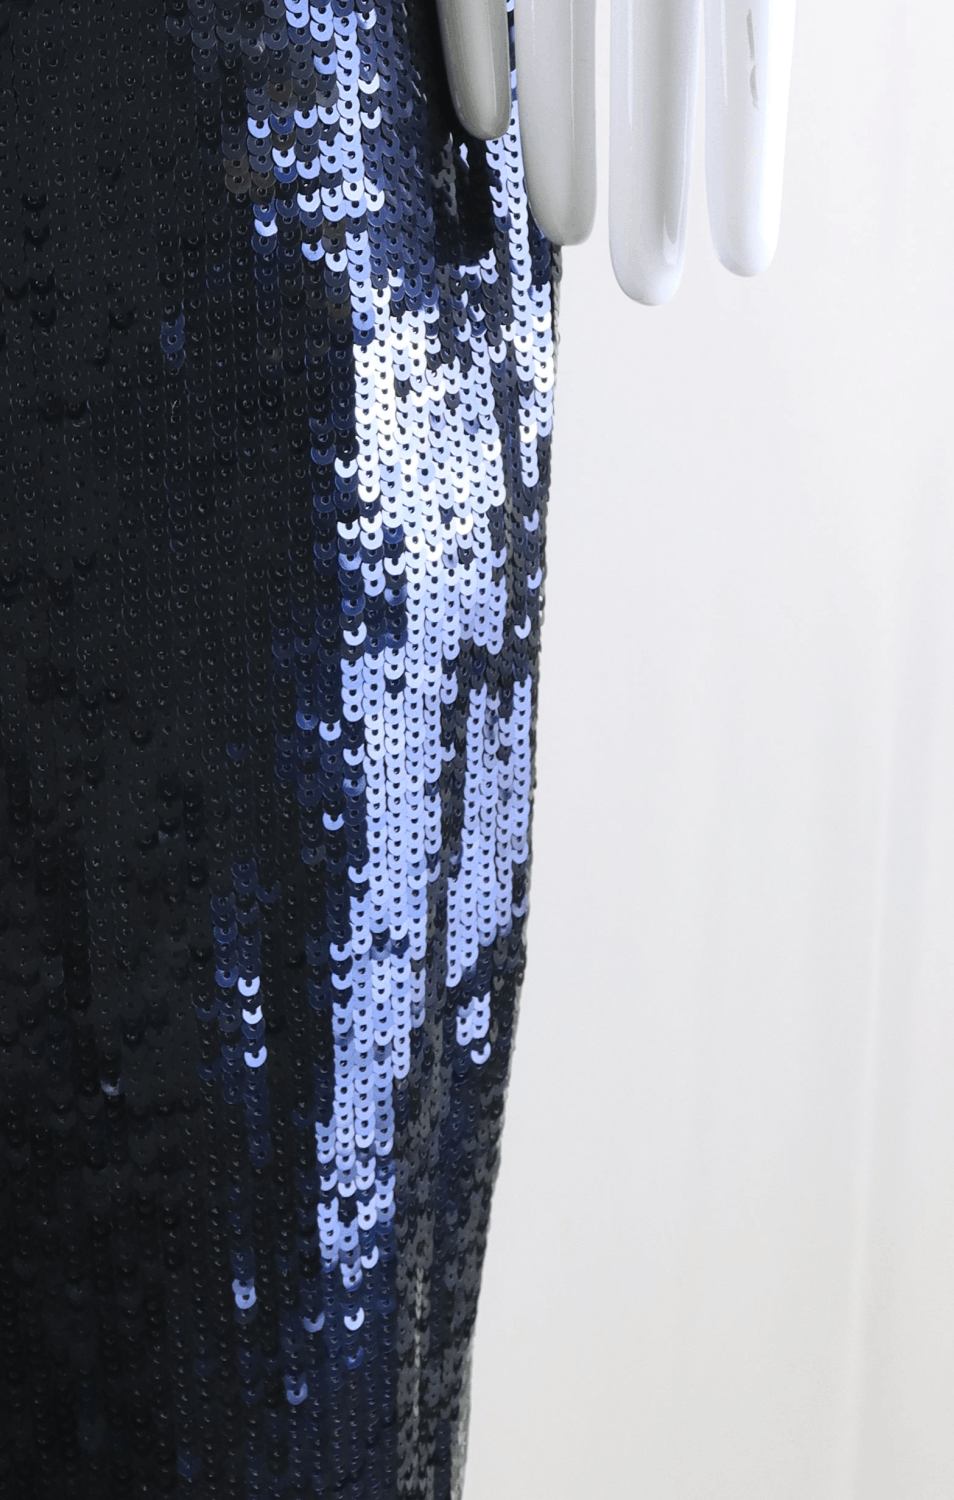 Preview Navy Sequined Pencil Skirt 8